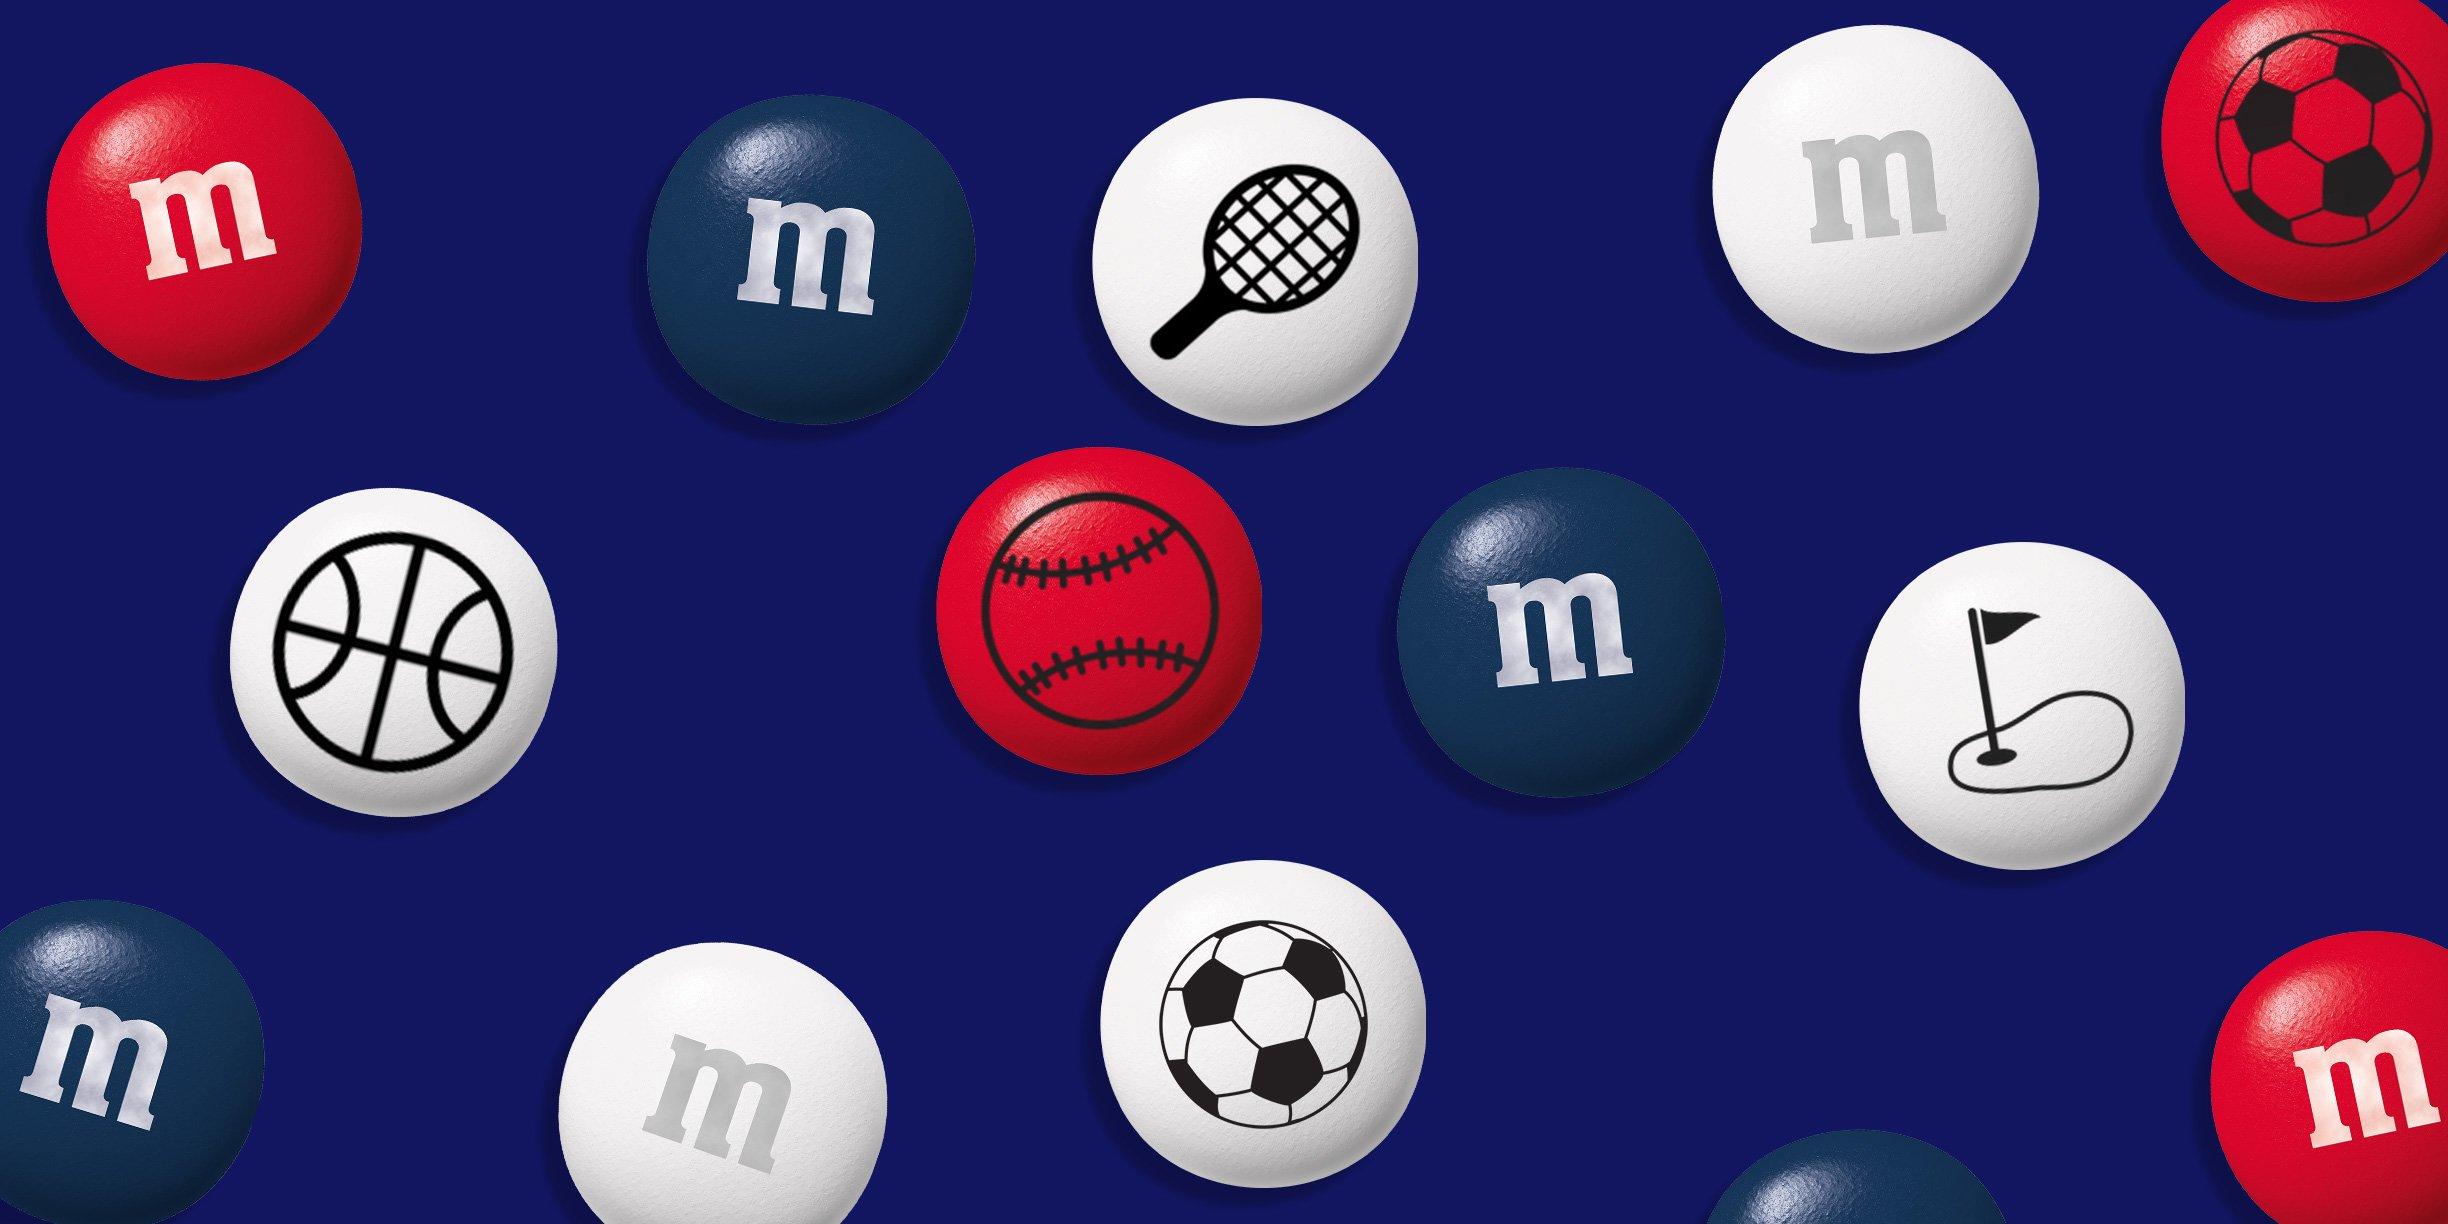 red, white and blue M&M'S with various sports clip art on a dark blue background